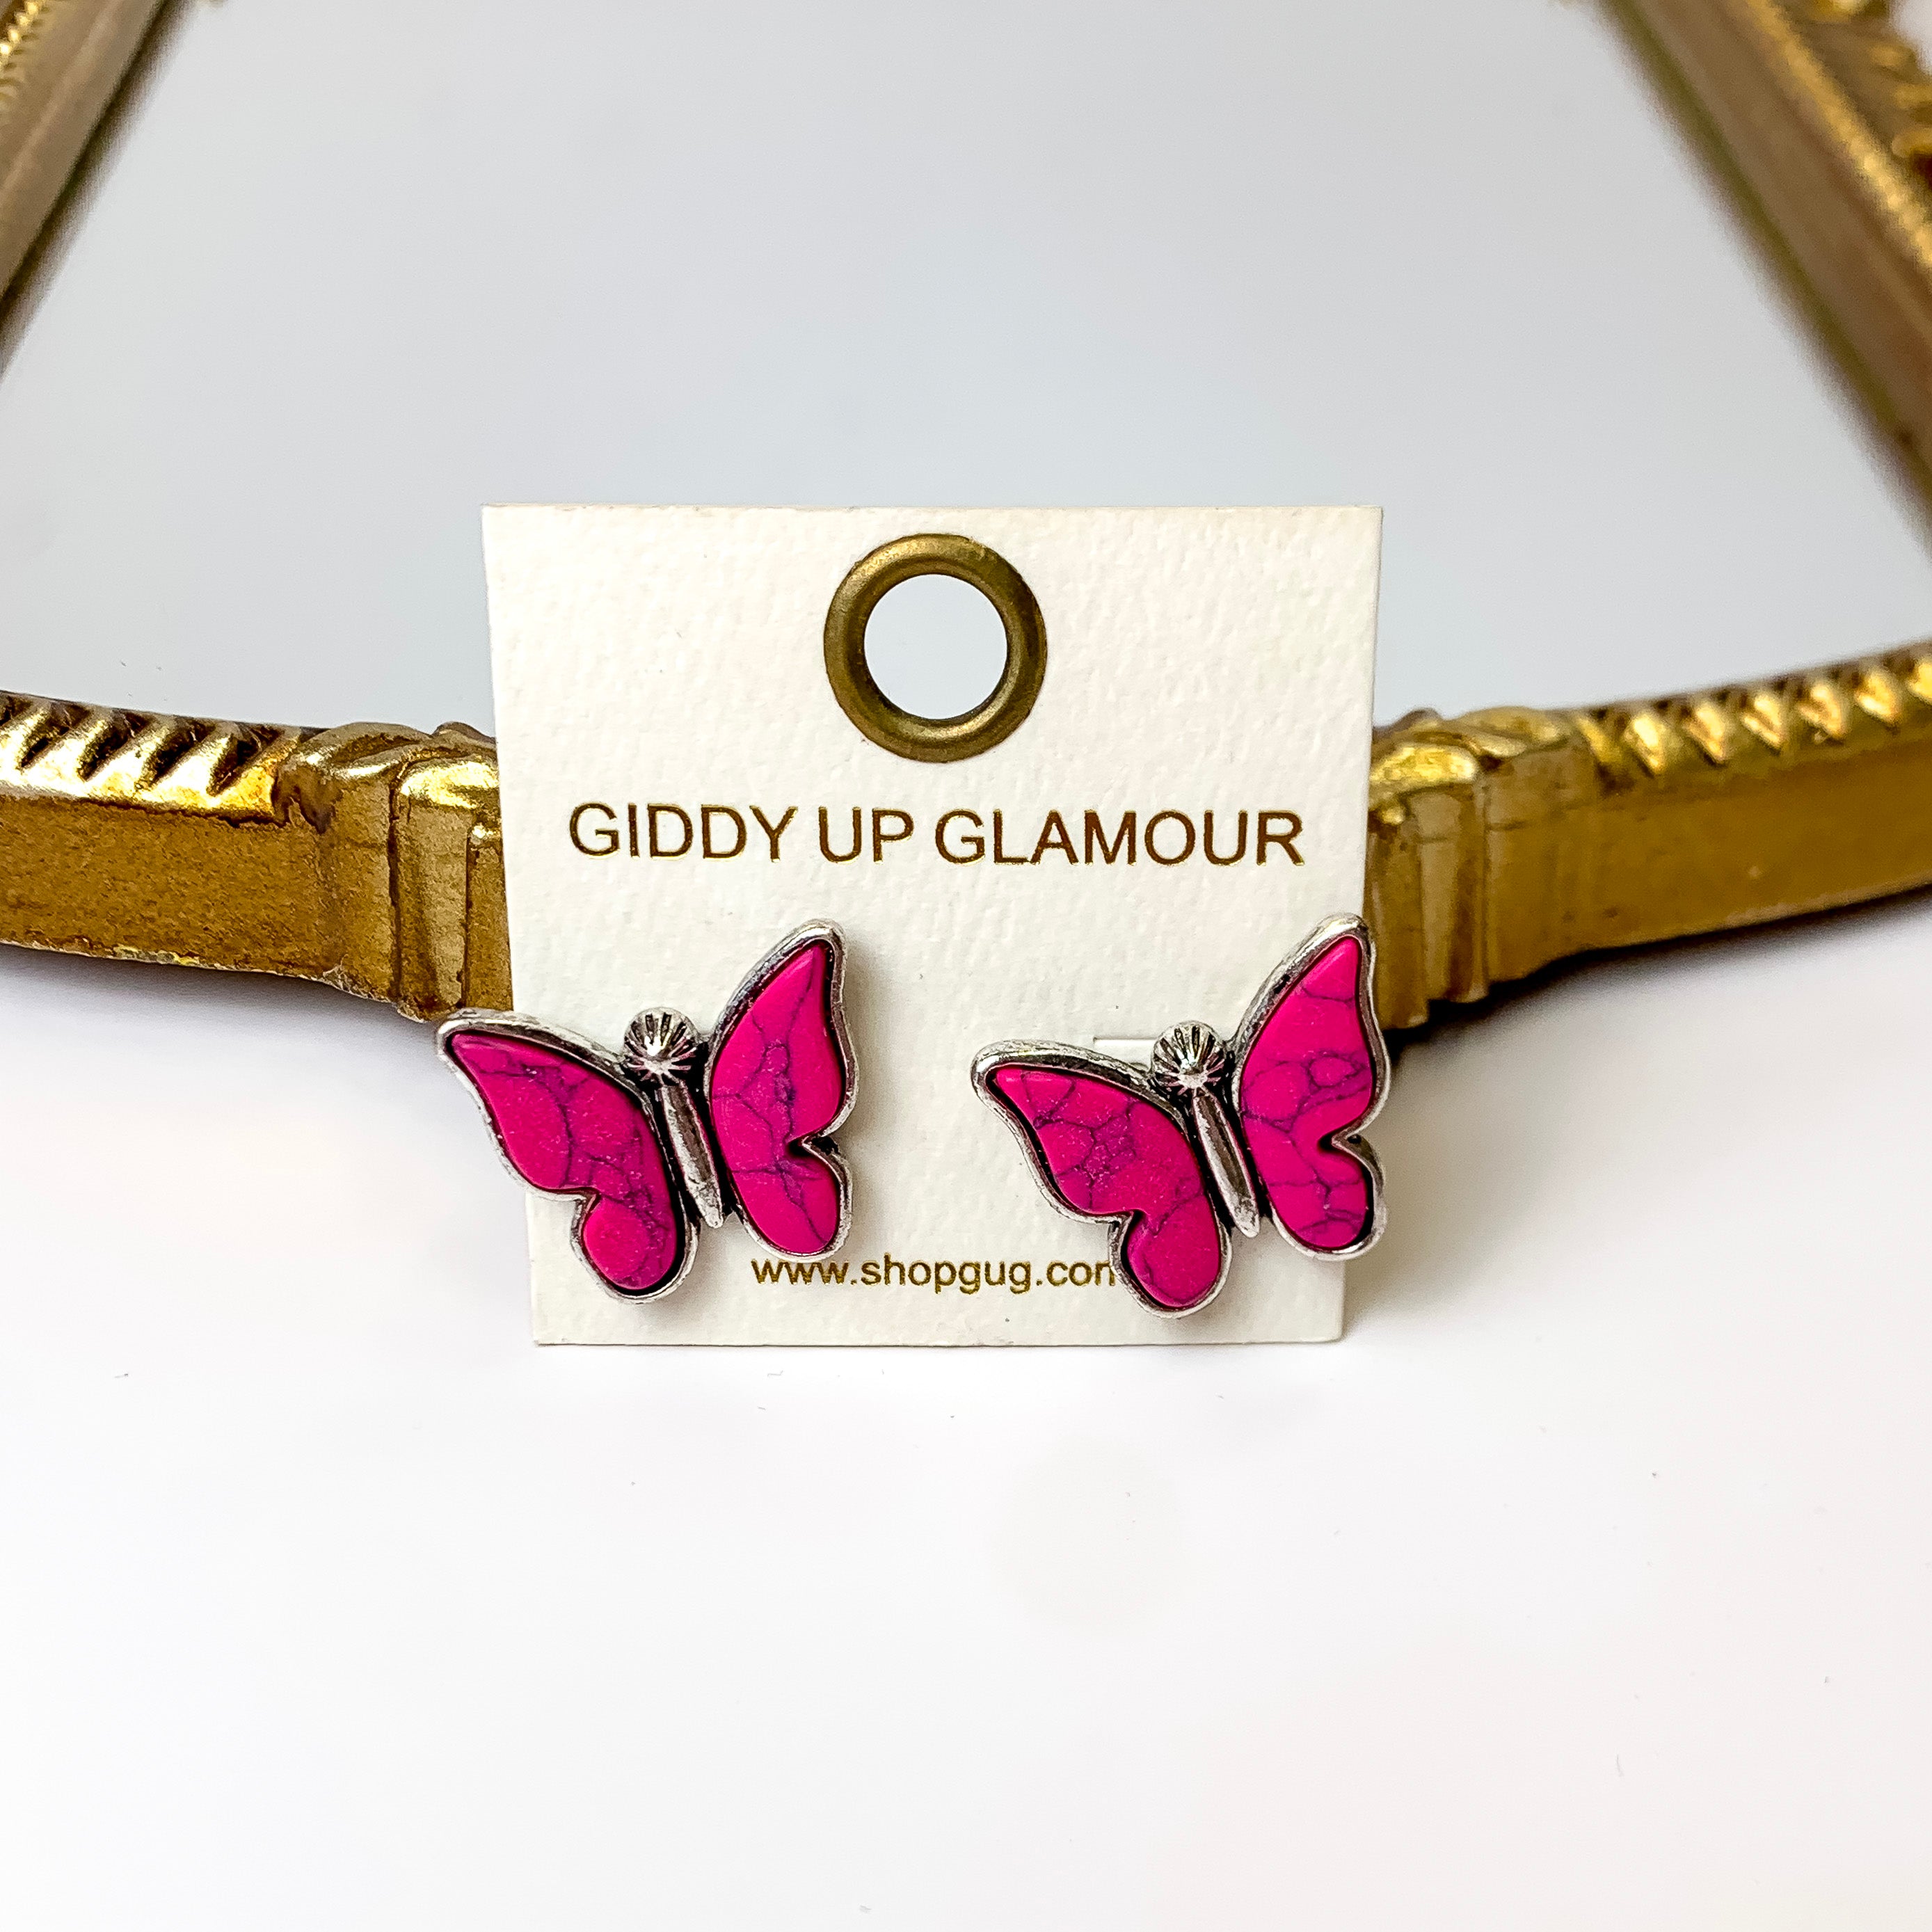 Silver Tone Faux Stone Butterfly Earrings in Fuchsia Pink - Giddy Up Glamour Boutique